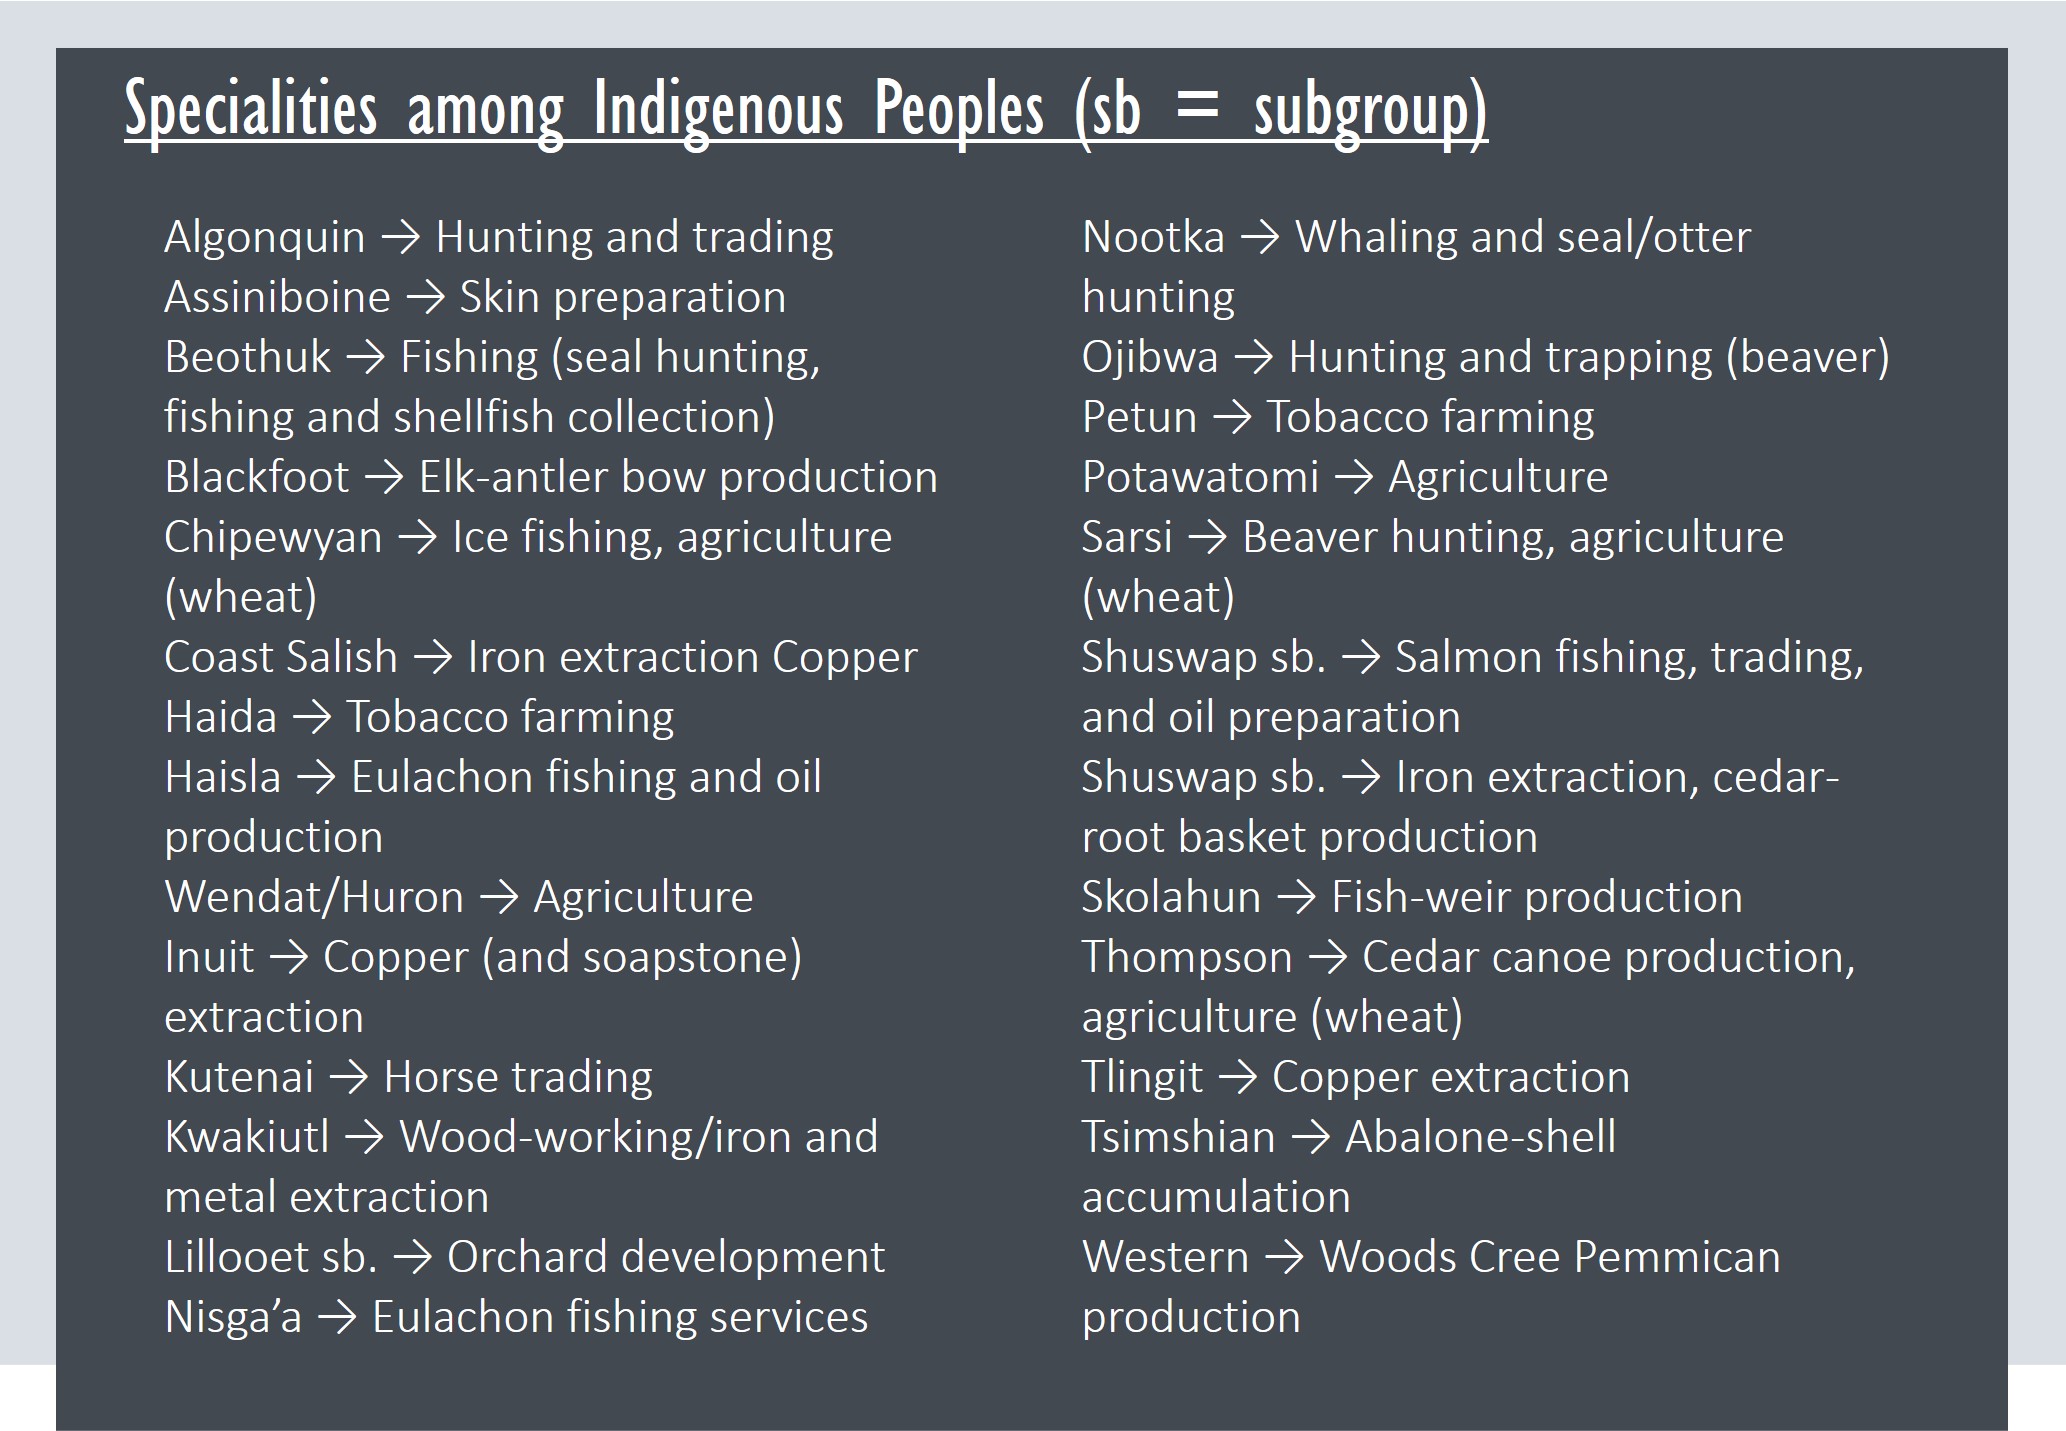 Specialities among Indigenous Peoples (sb = subgroup)